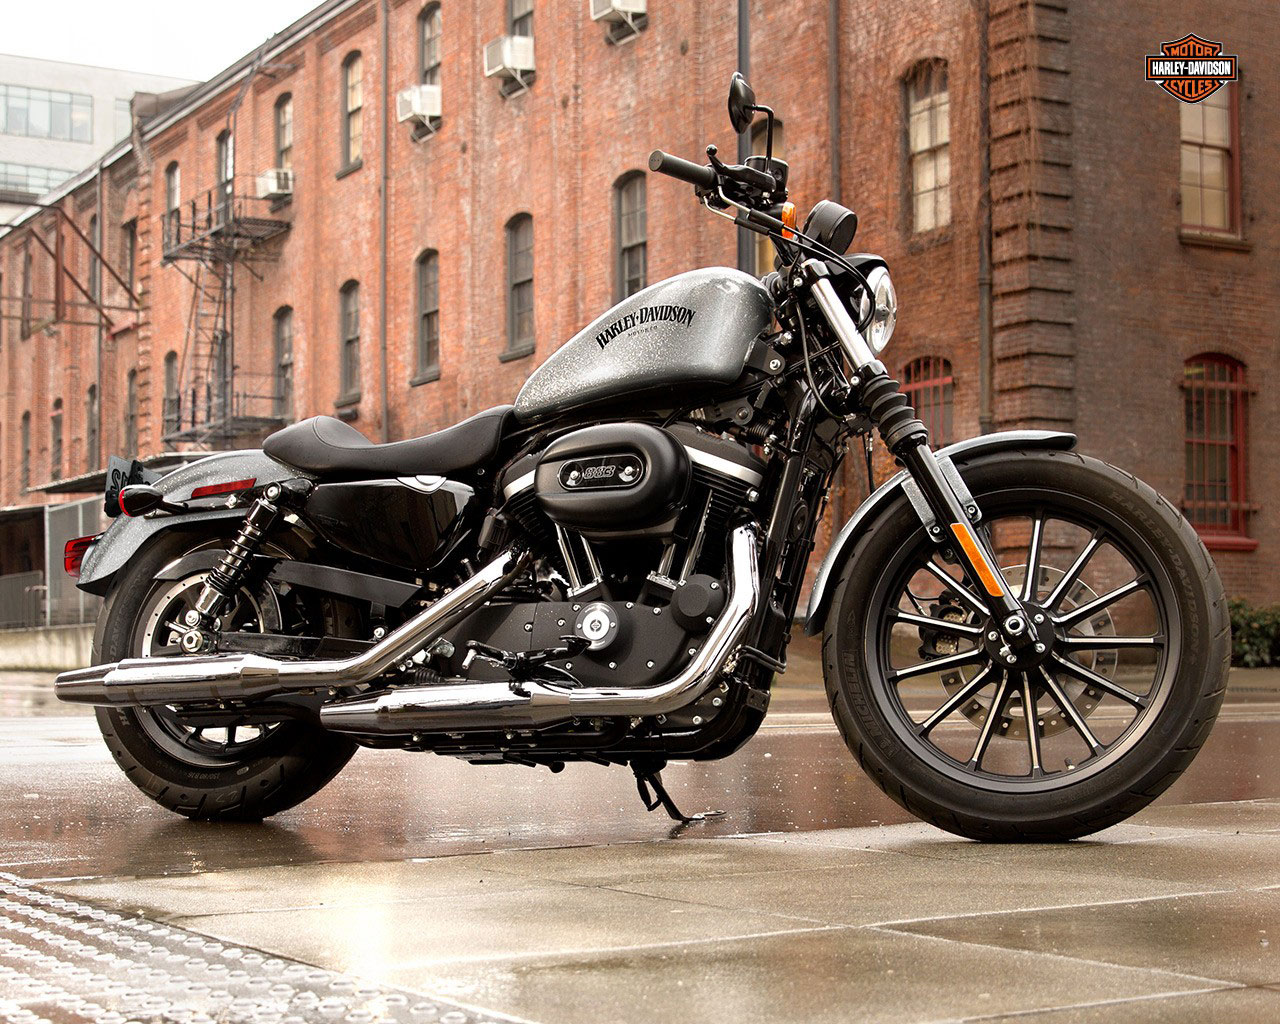 Harley Davidson Bikes | Wallpapers, Backgrounds, Images, Art Photos.